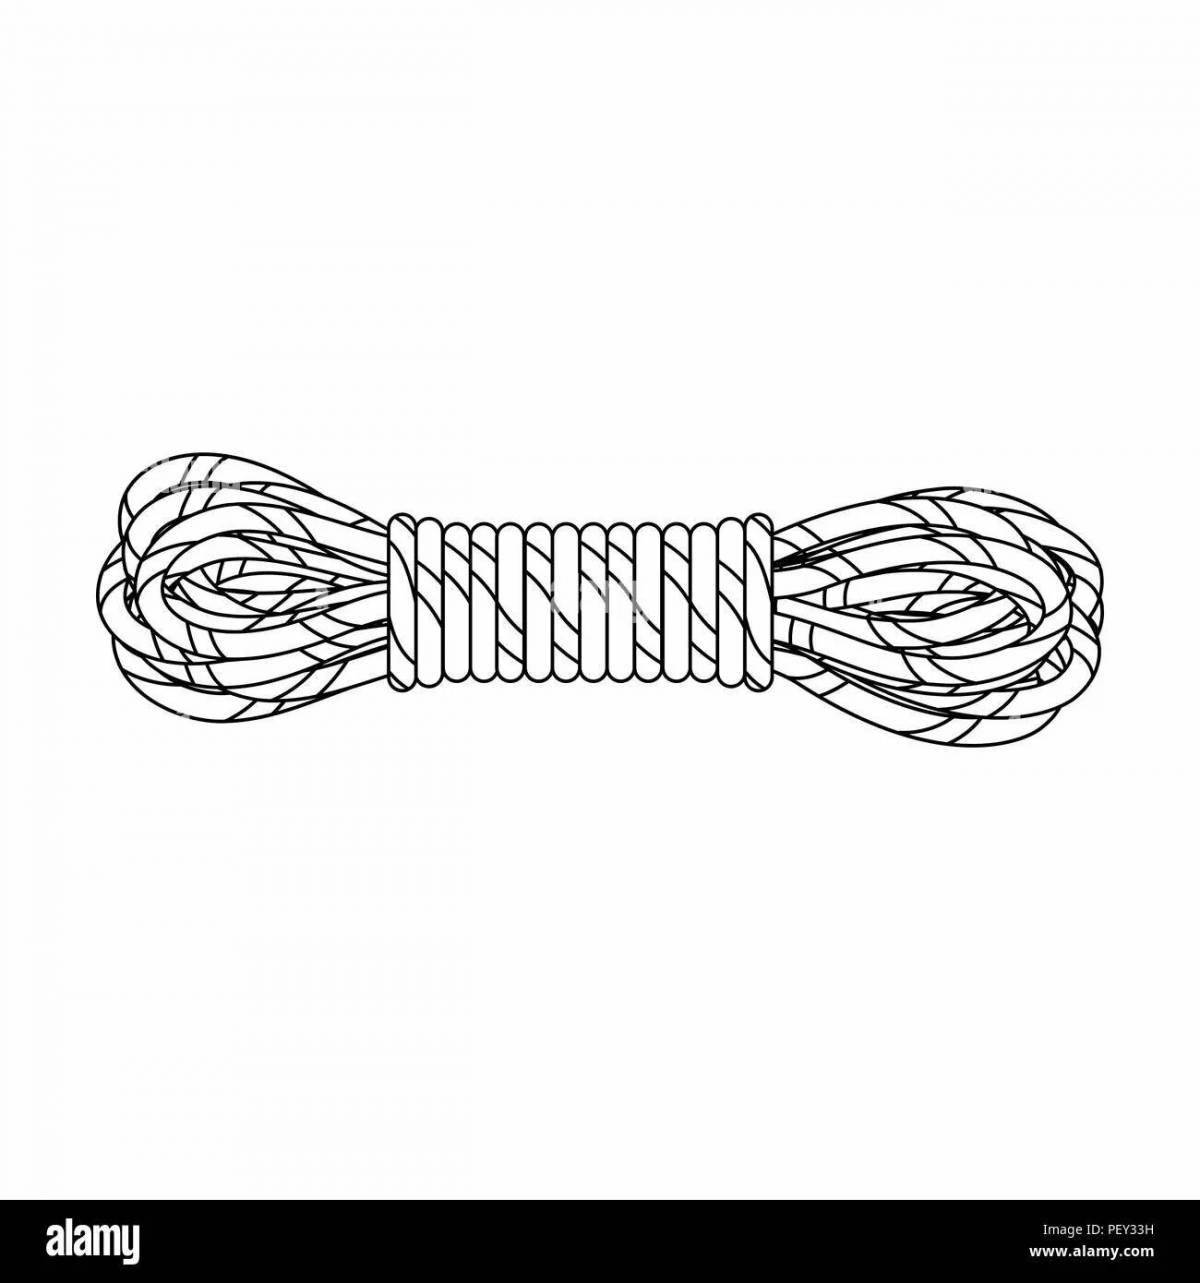 Colorful rope coloring page